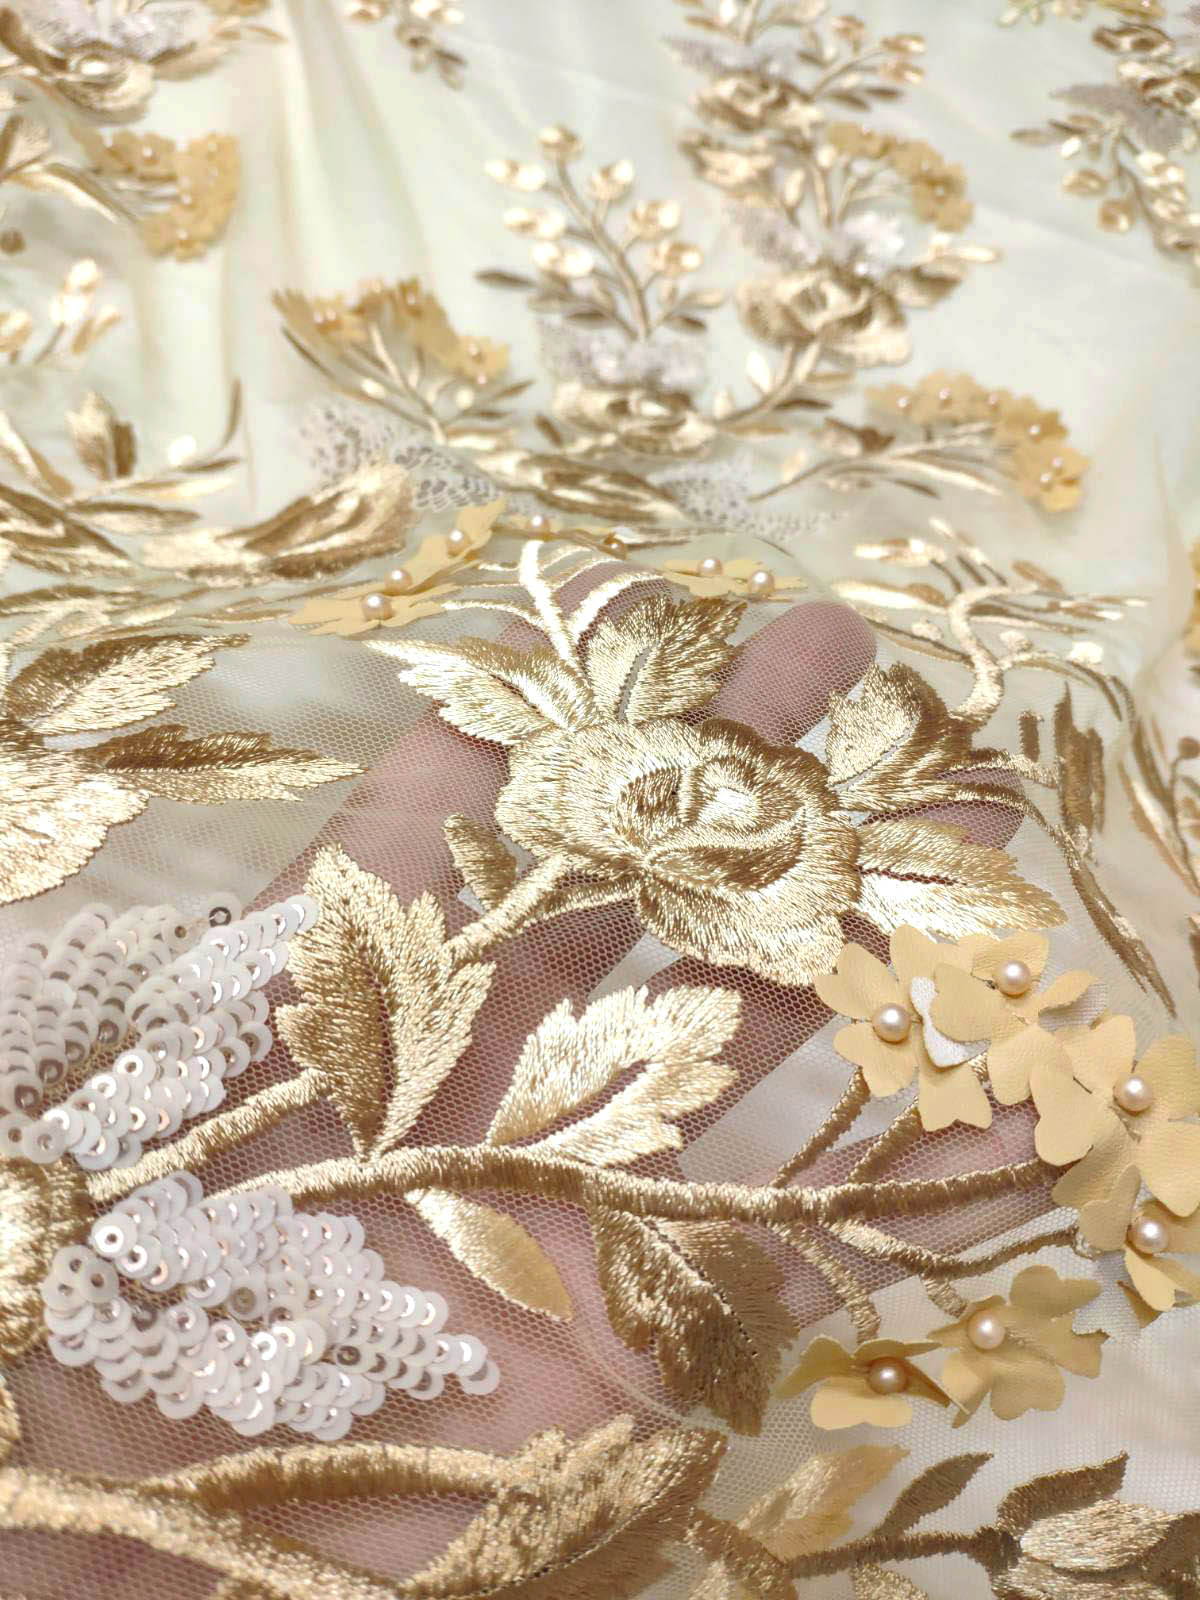 Gold lace fabric with flowers 110mm - 13,7m - gold